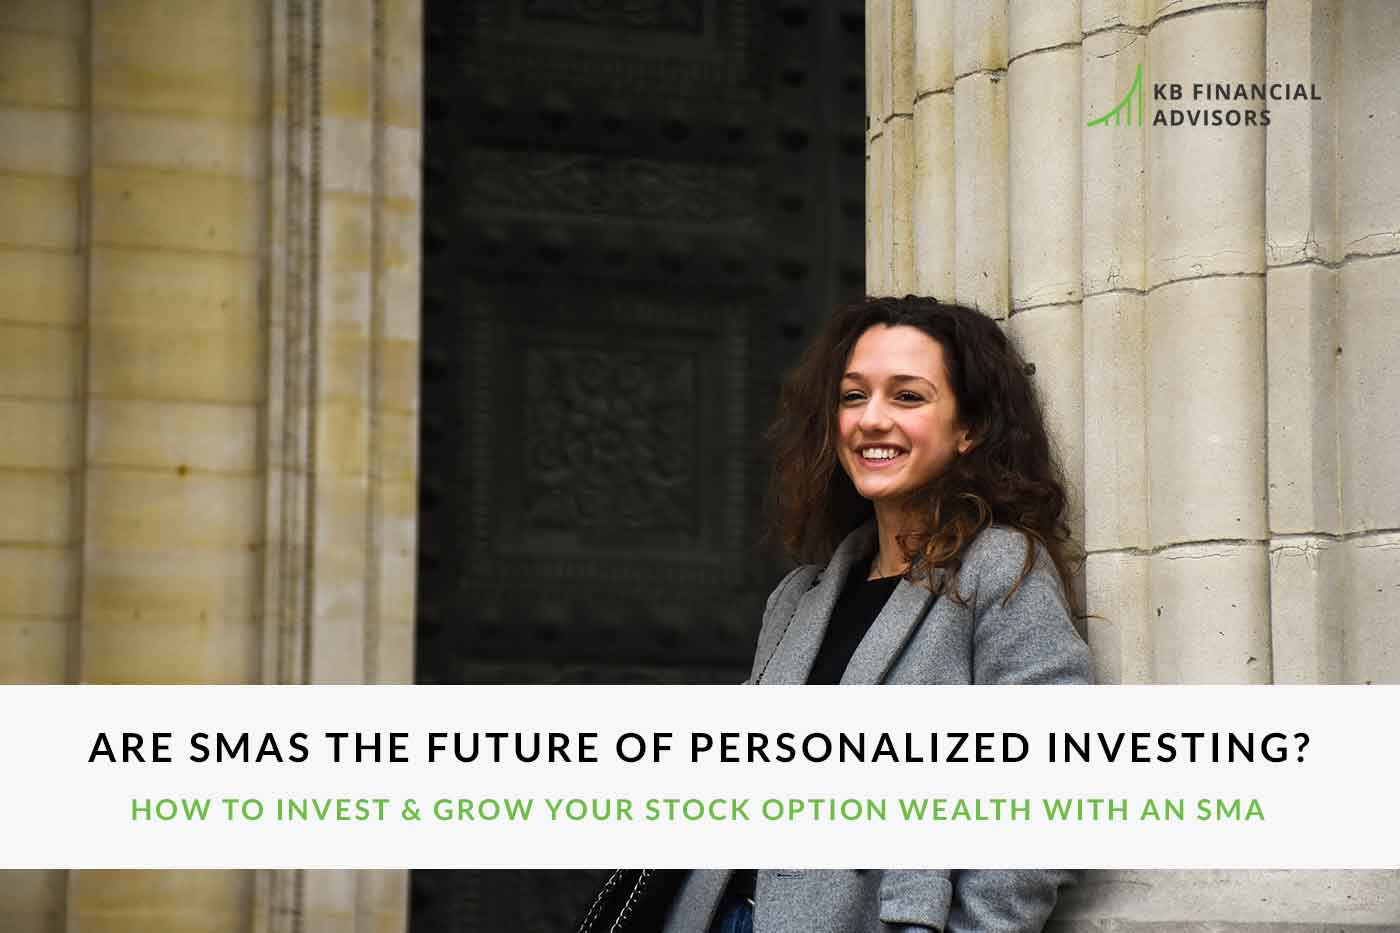 Are SMAs the Future of Personalized Investing? How to Invest & Grow Your Stock Option Wealth With an SMA